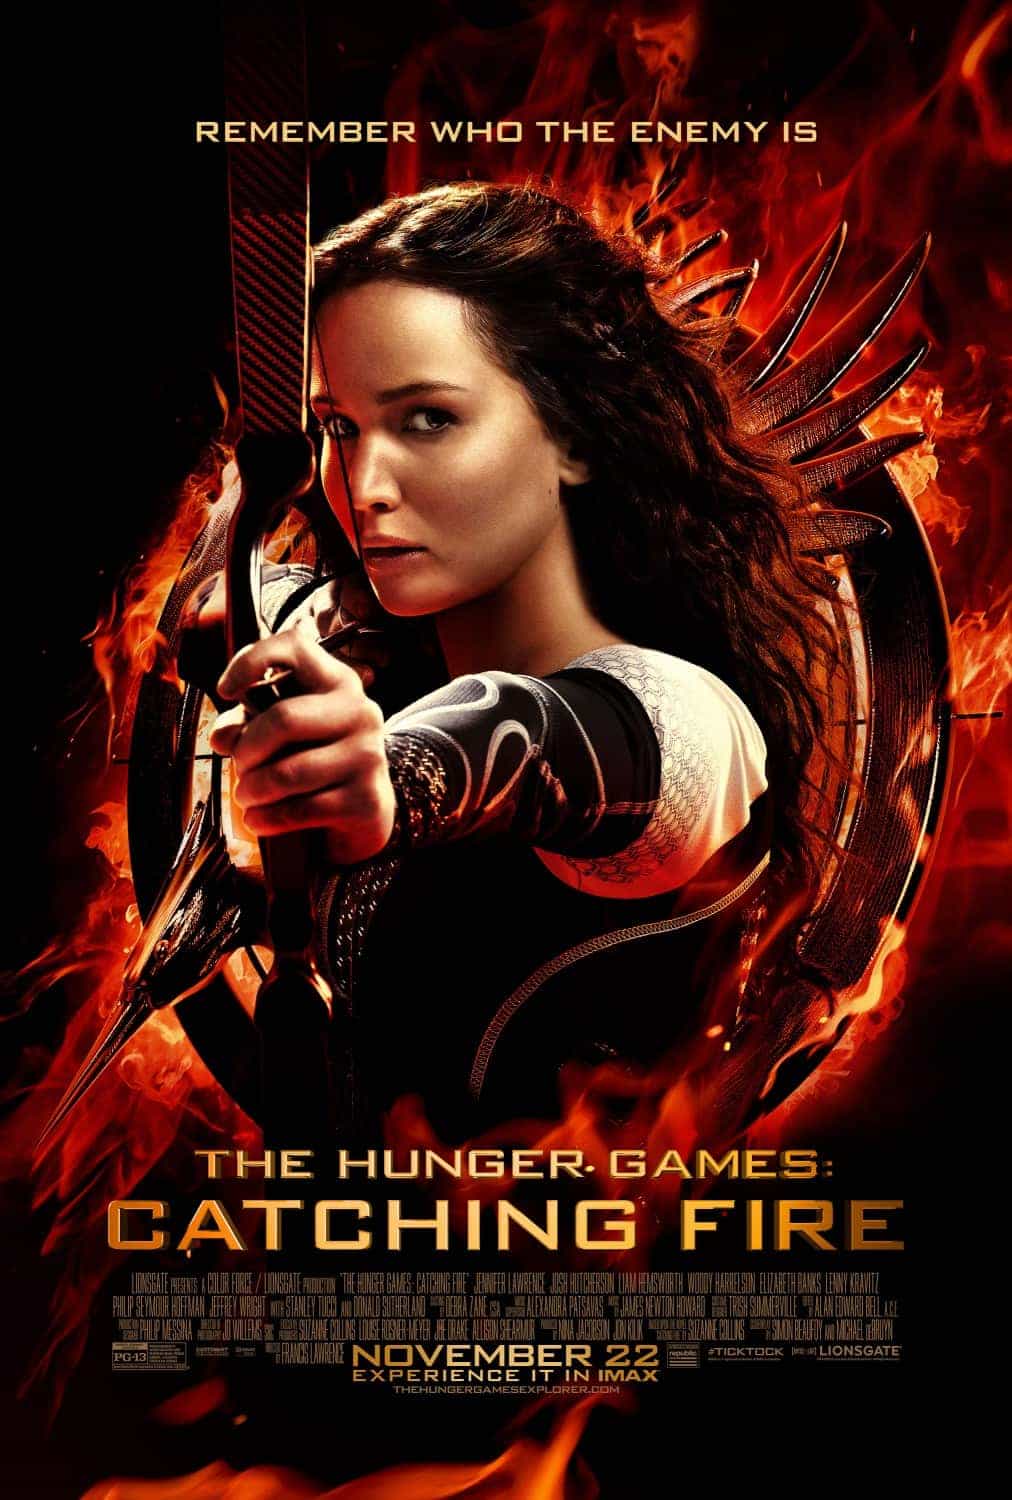 UK DVD/Blu-ray sales: The Hunger Games: Catching fire lights its way to the top